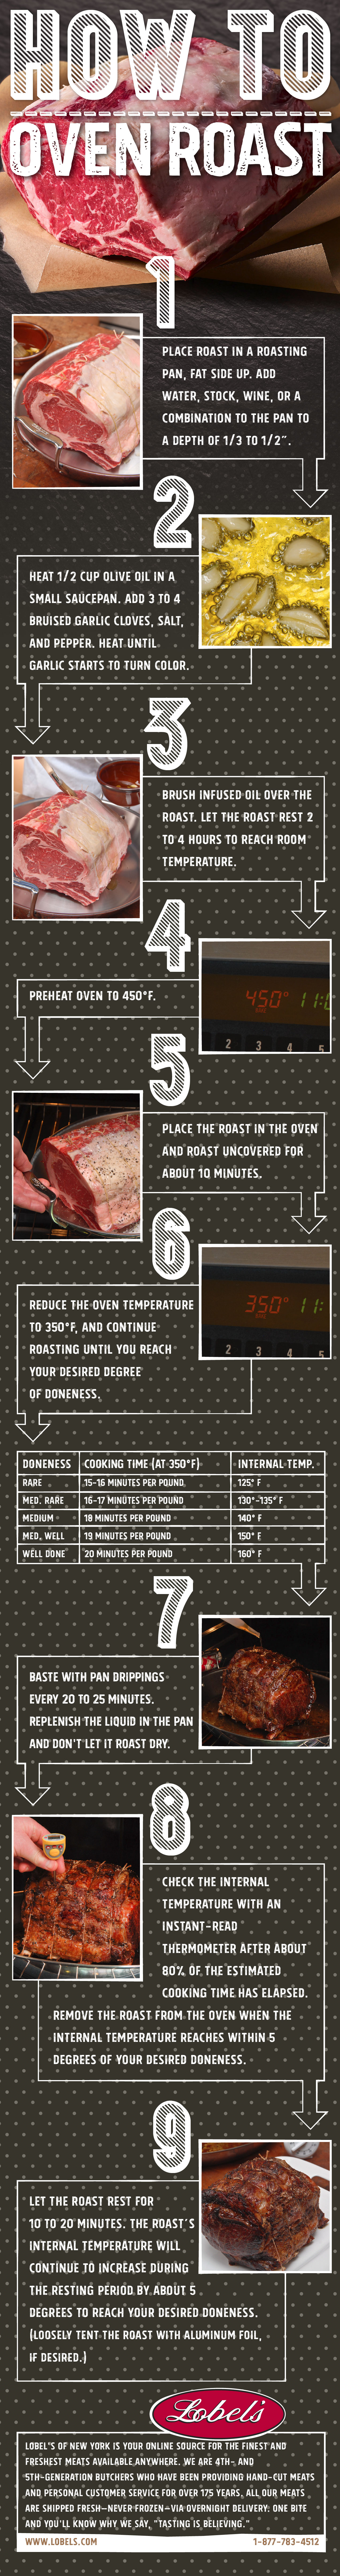 Info Graphic: How To Oven Roast